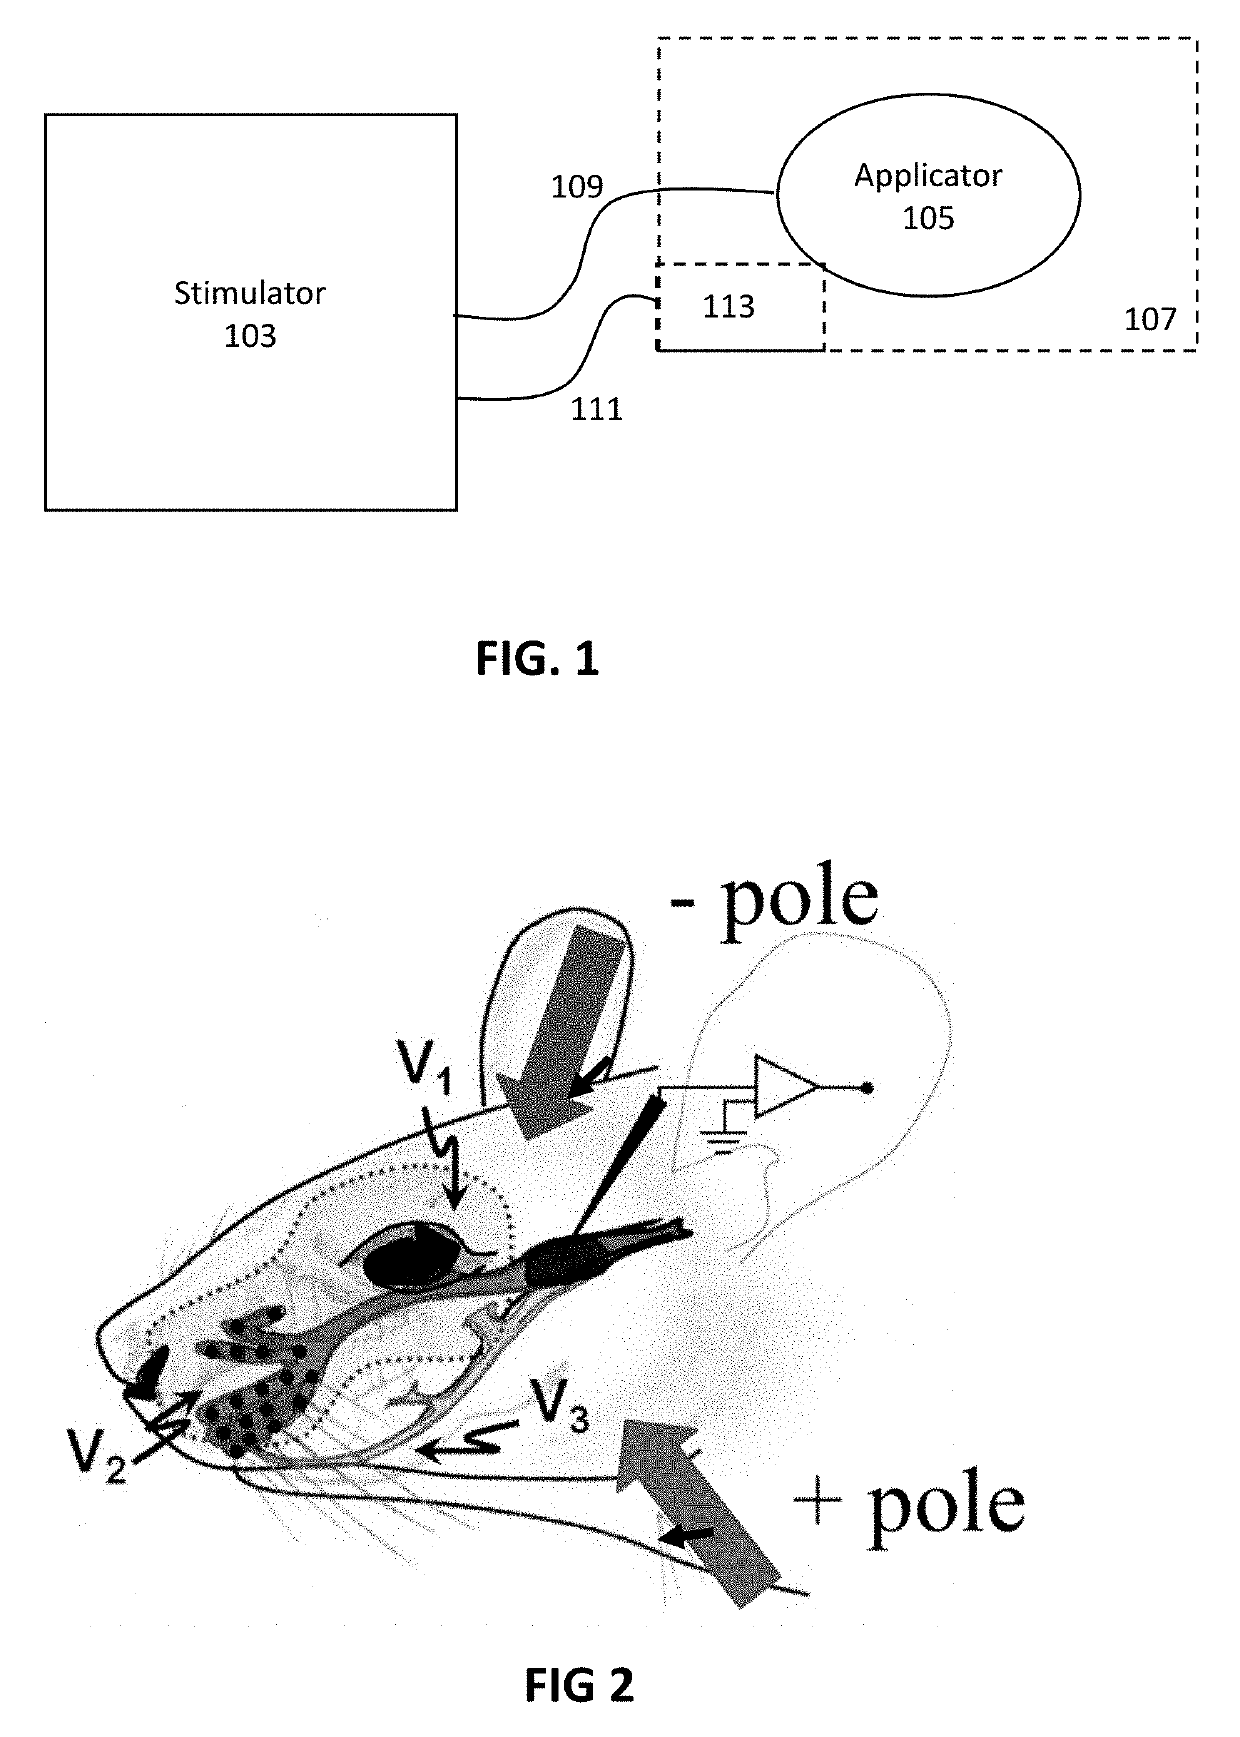 Methods and apparatuses for reducing bleeding via electrical trigeminal nerve stimulation